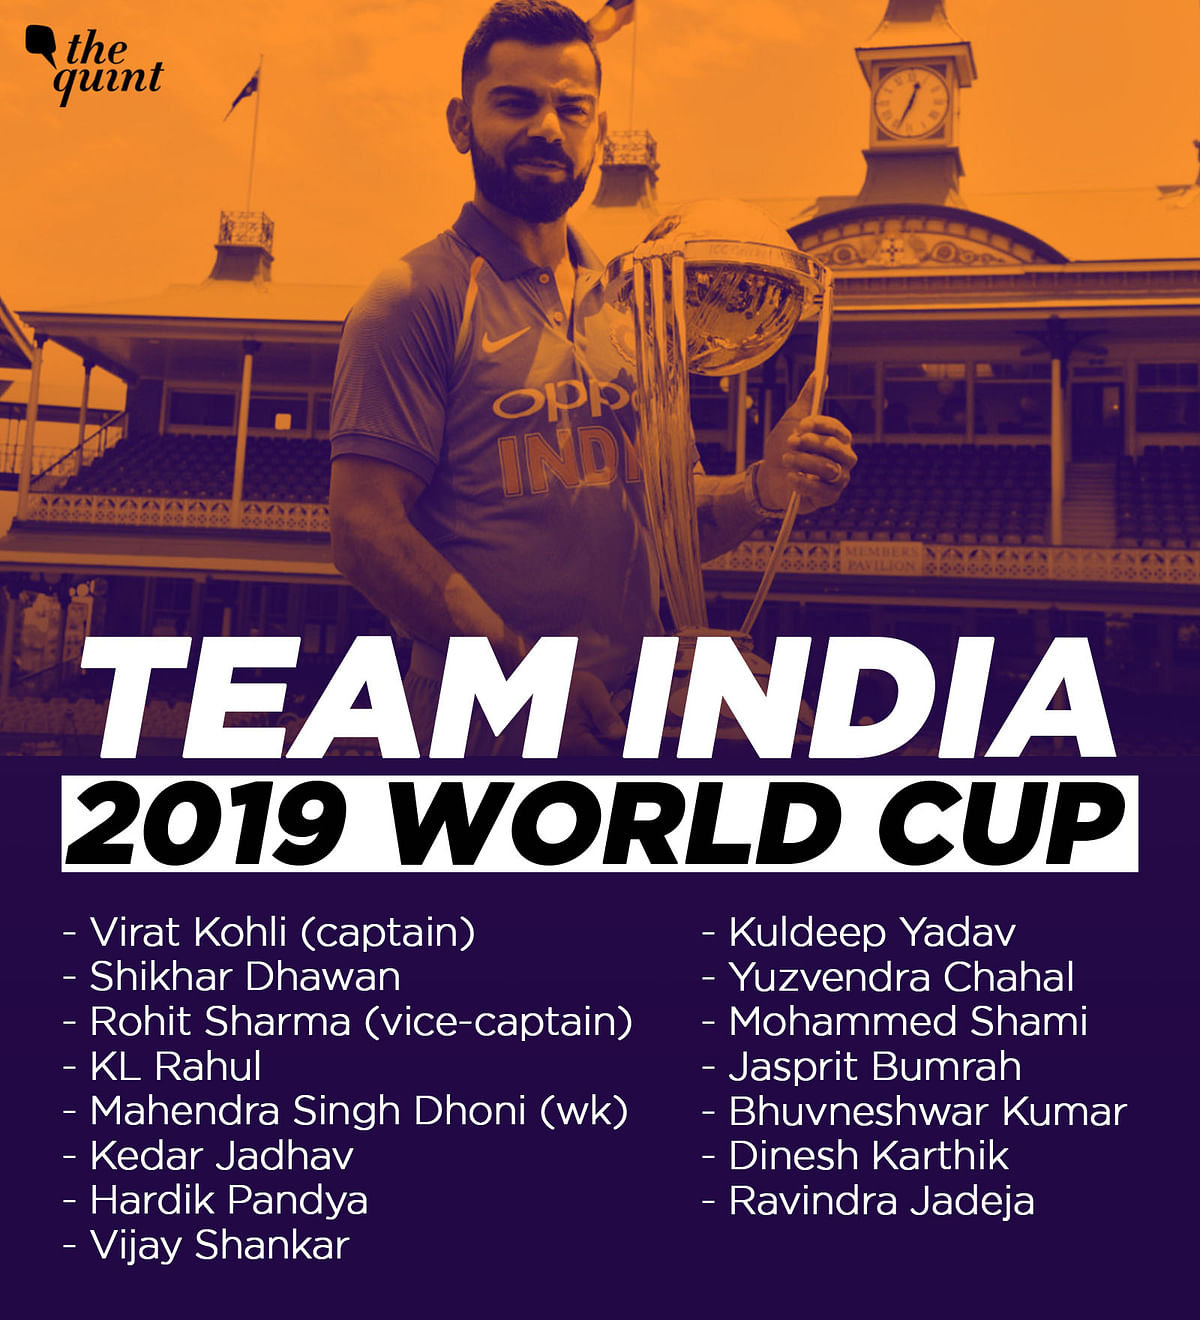 Here is the list of 15-member Indian team selected for the World Cup: